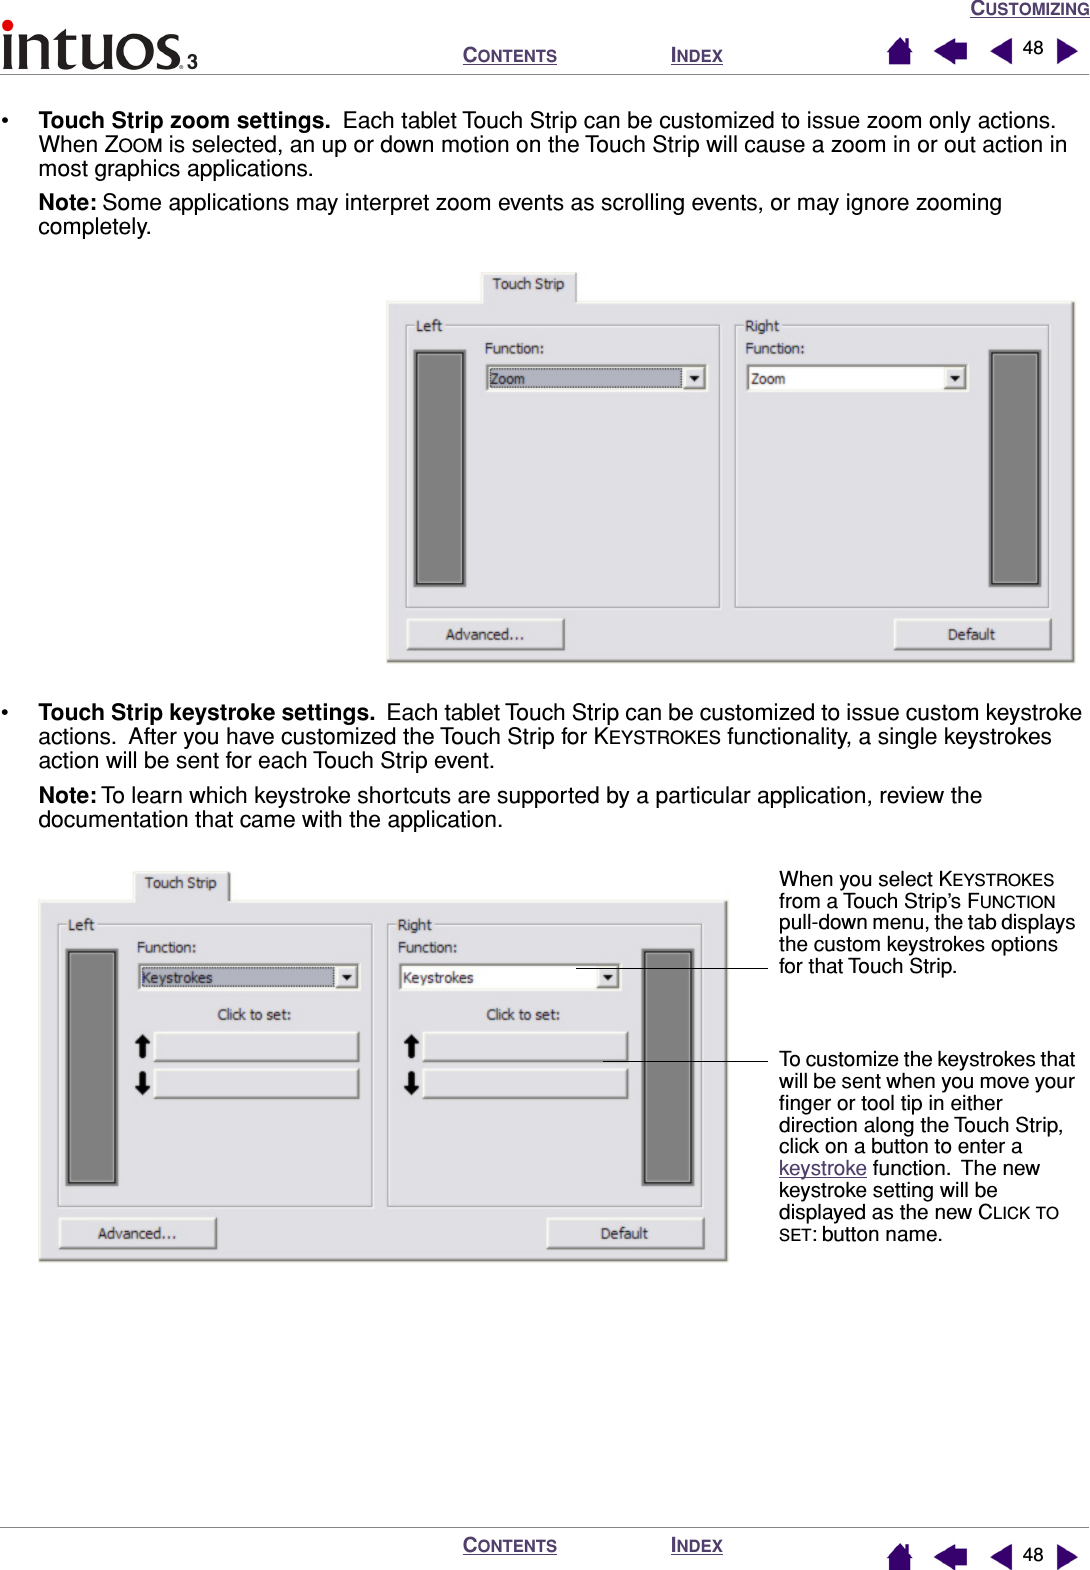 CUSTOMIZINGINDEXCONTENTSINDEXCONTENTS 4848•Touch Strip zoom settings.  Each tablet Touch Strip can be customized to issue zoom only actions.  When ZOOM is selected, an up or down motion on the Touch Strip will cause a zoom in or out action in most graphics applications.Note: Some applications may interpret zoom events as scrolling events, or may ignore zooming completely.  •Touch Strip keystroke settings.  Each tablet Touch Strip can be customized to issue custom keystroke actions.  After you have customized the Touch Strip for KEYSTROKES functionality, a single keystrokes action will be sent for each Touch Strip event.Note: To learn which keystroke shortcuts are supported by a particular application, review the documentation that came with the application. When you select KEYSTROKES from a Touch Strip’s FUNCTION pull-down menu, the tab displays the custom keystrokes options for that Touch Strip.To customize the keystrokes that will be sent when you move your ﬁnger or tool tip in either direction along the Touch Strip, click on a button to enter a keystroke function.  The new keystroke setting will be displayed as the new CLICK TO SET: button name.